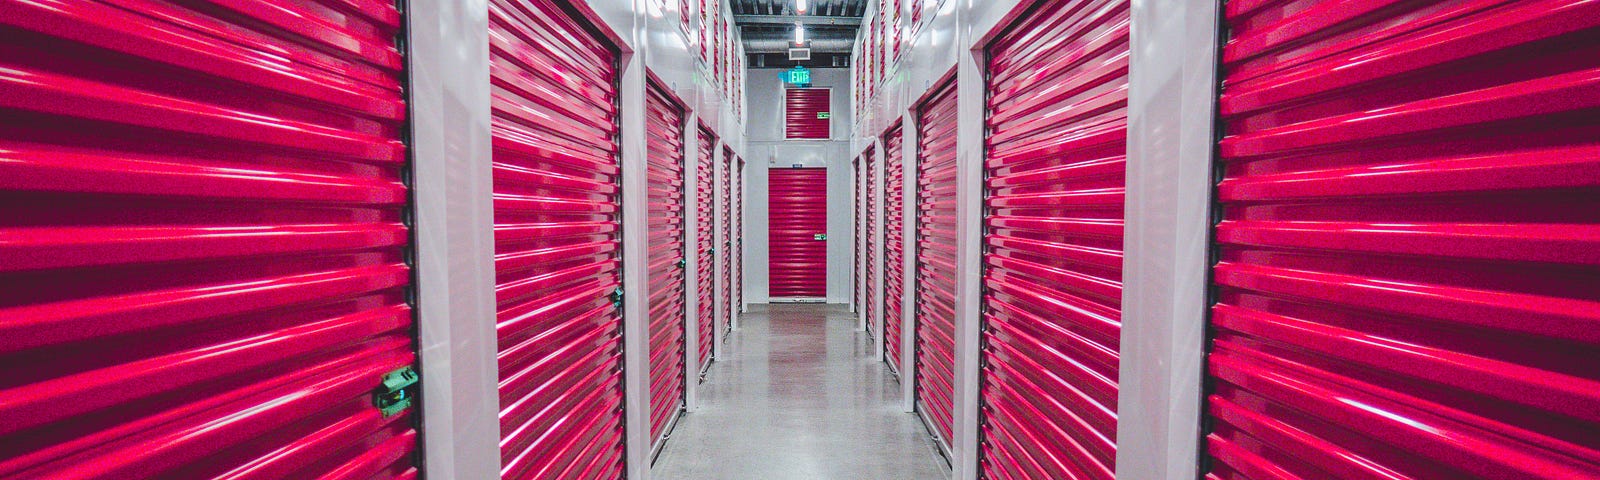 inside the hall way of storage units with pink doors